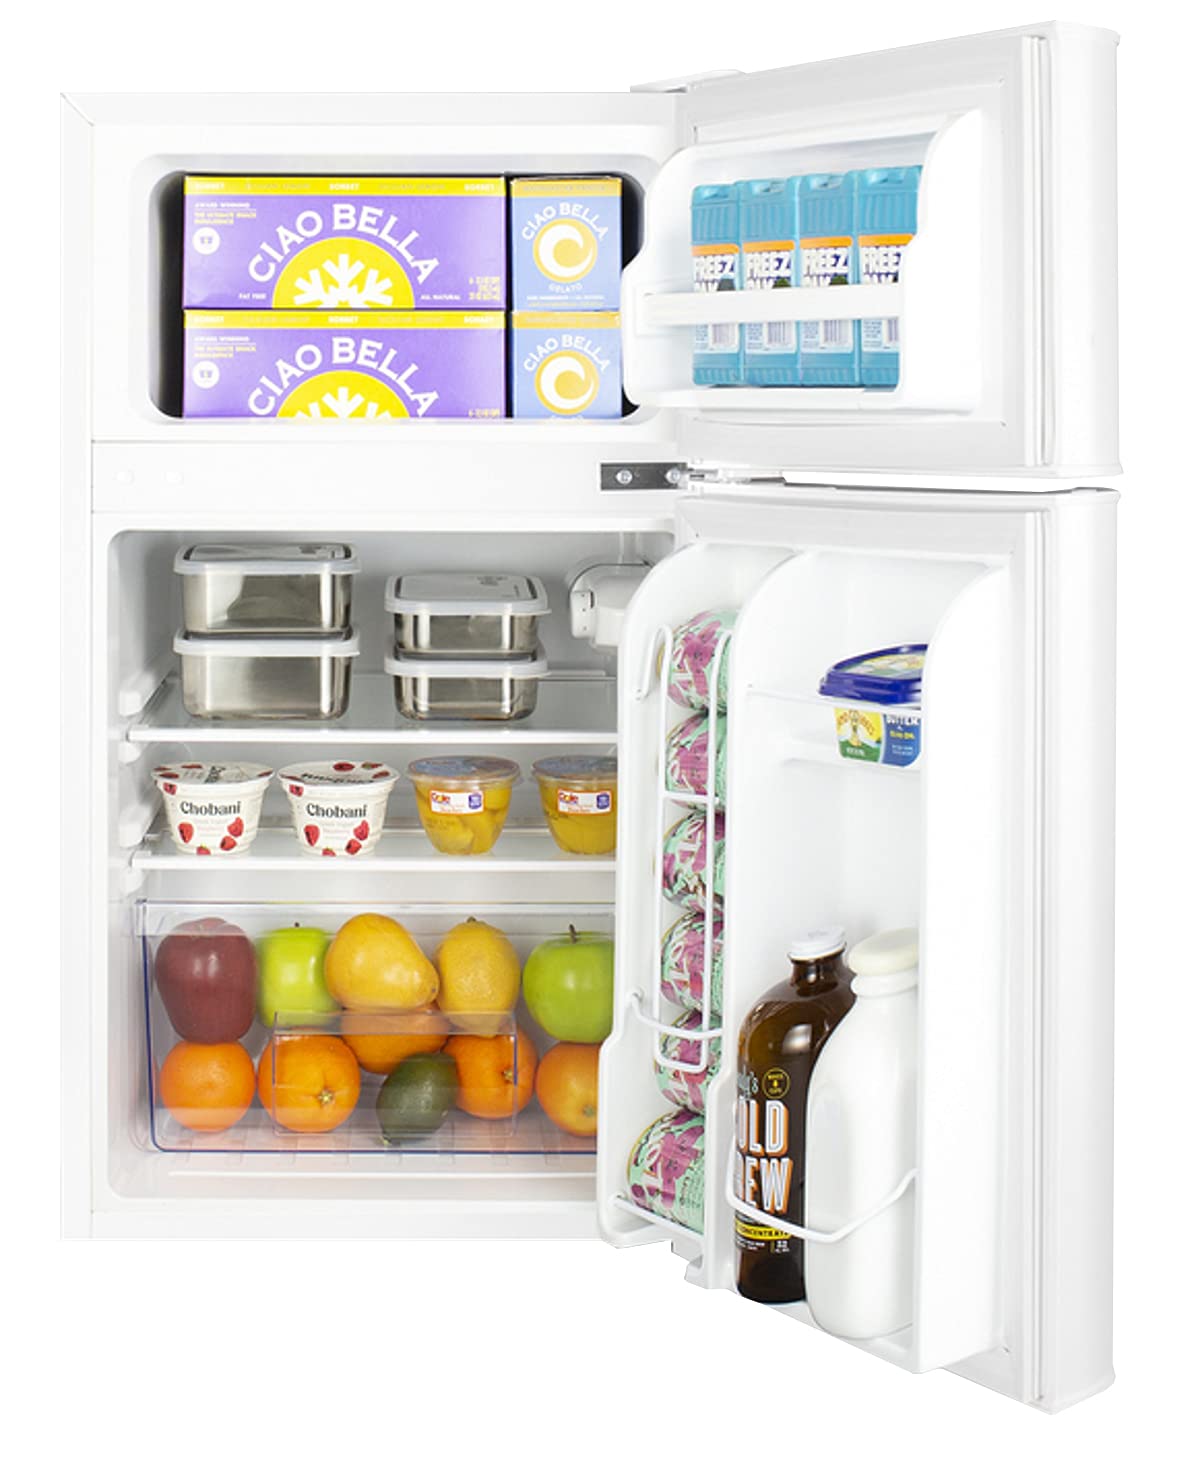 Summit Appliance CP34W ENERGY STAR Certified 19" Wide Counter Height 2-Door Refrigerator-Freezer in White with Cycle Defrost, Adjustable Thermostat, Interior Light